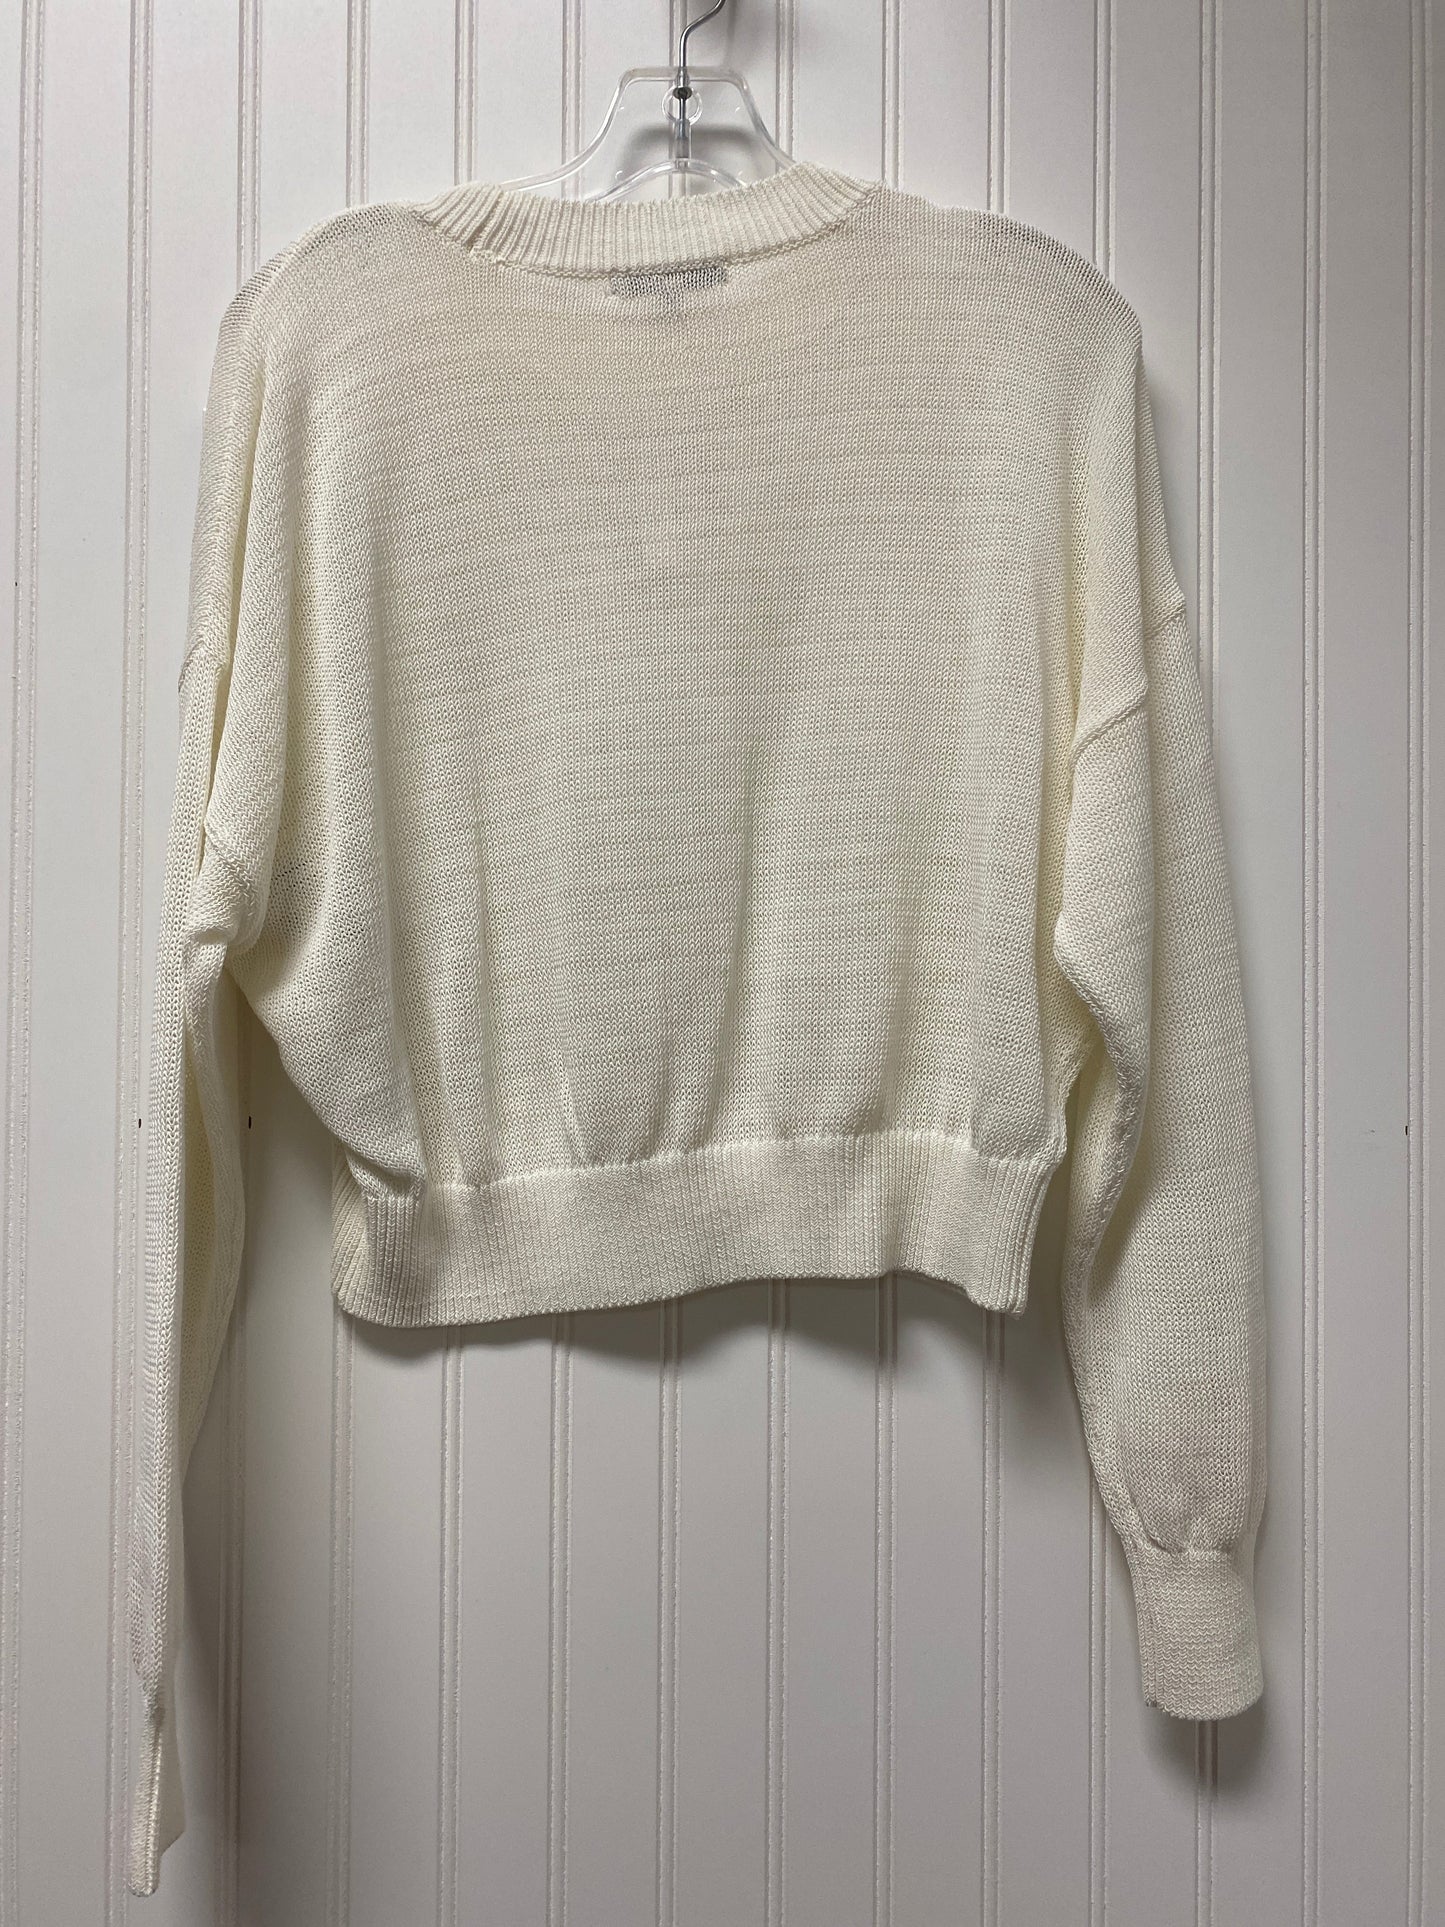 White Sweater Madewell, Size M